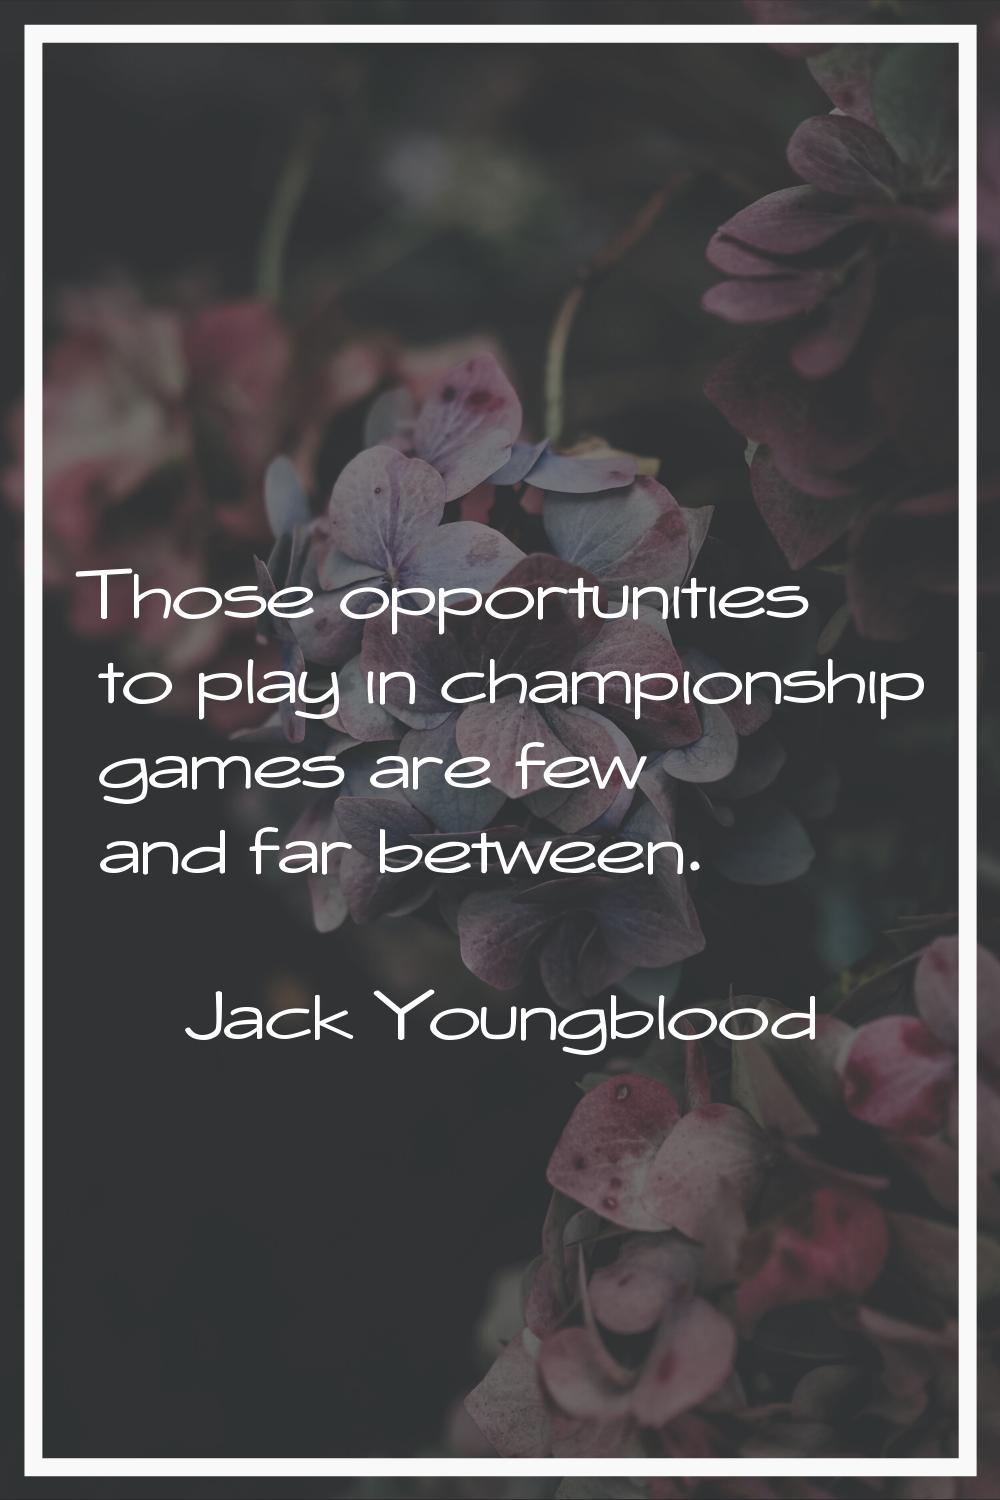 Those opportunities to play in championship games are few and far between.